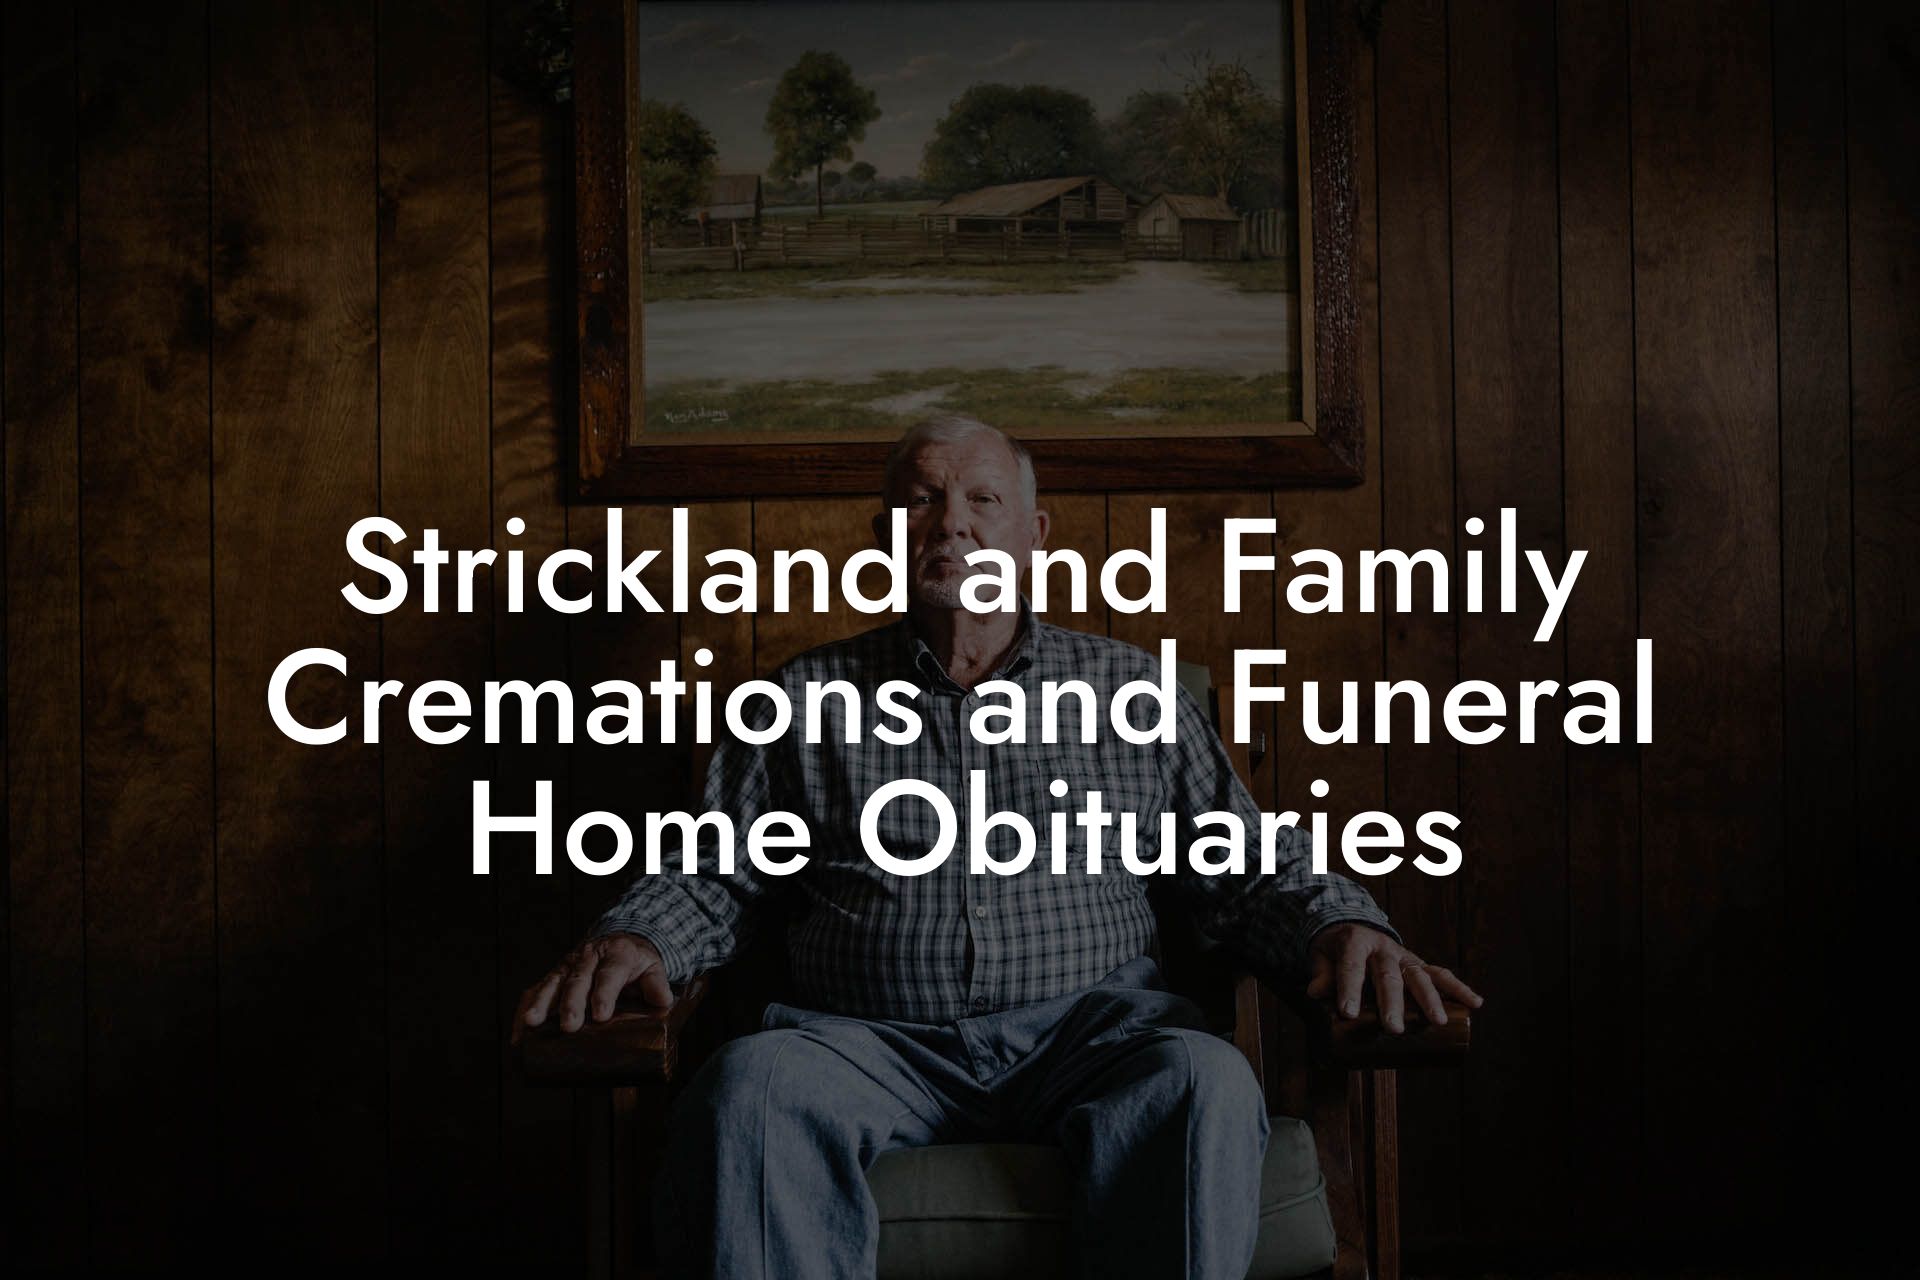 Strickland and Family Cremations and Funeral Home Obituaries